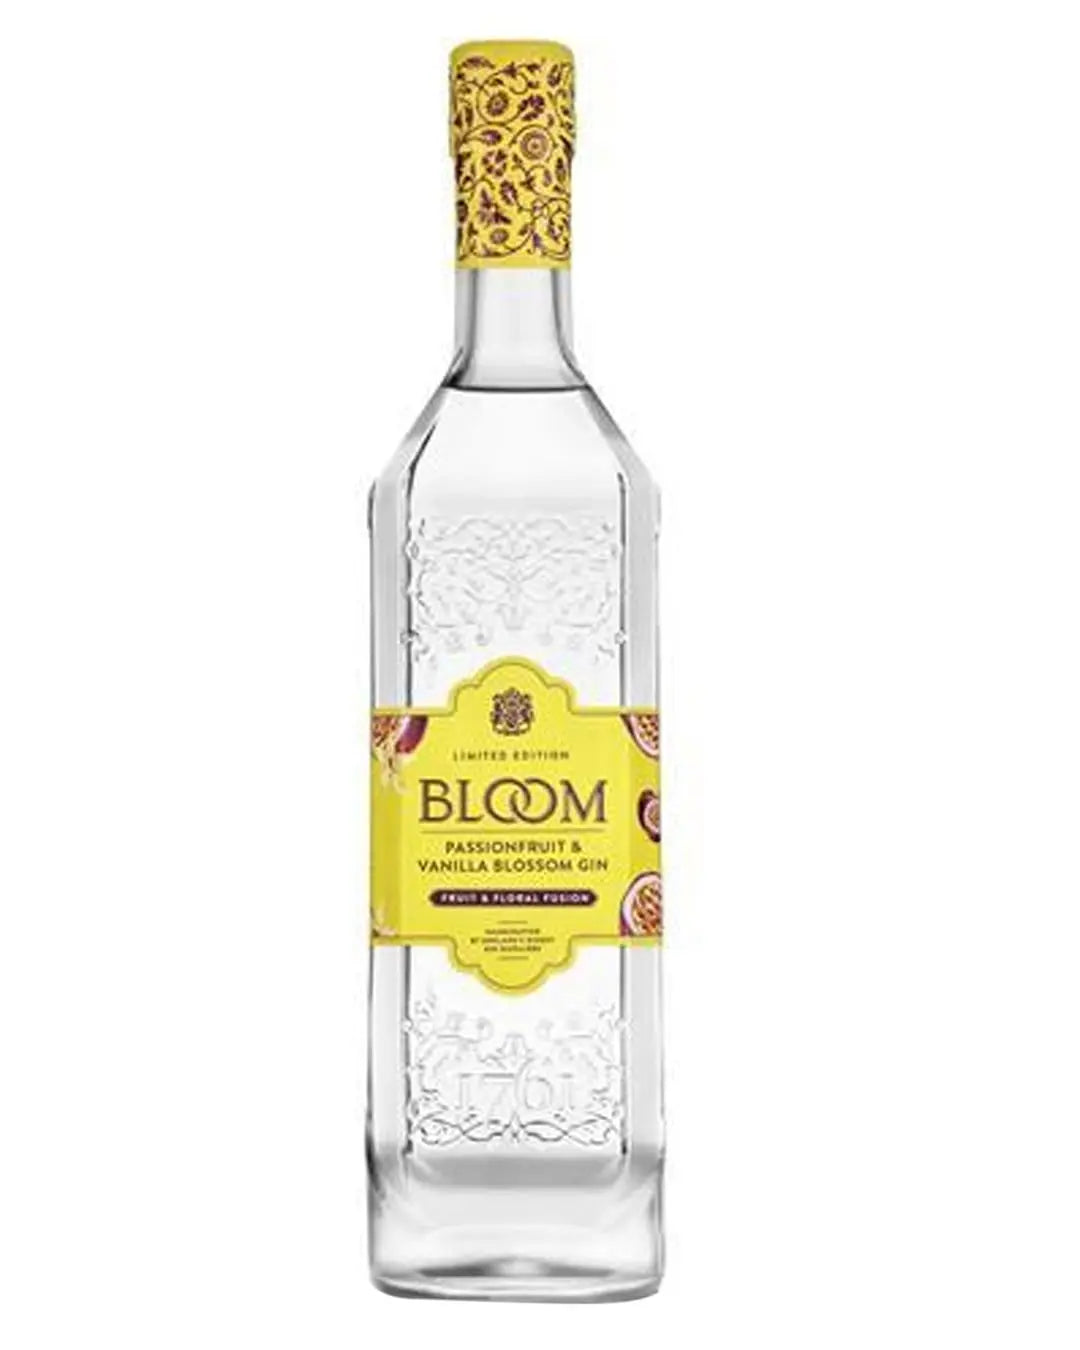 Bloom Passionfruit & Vanilla Blossom Gin, 70 cl Gin 5010296010763